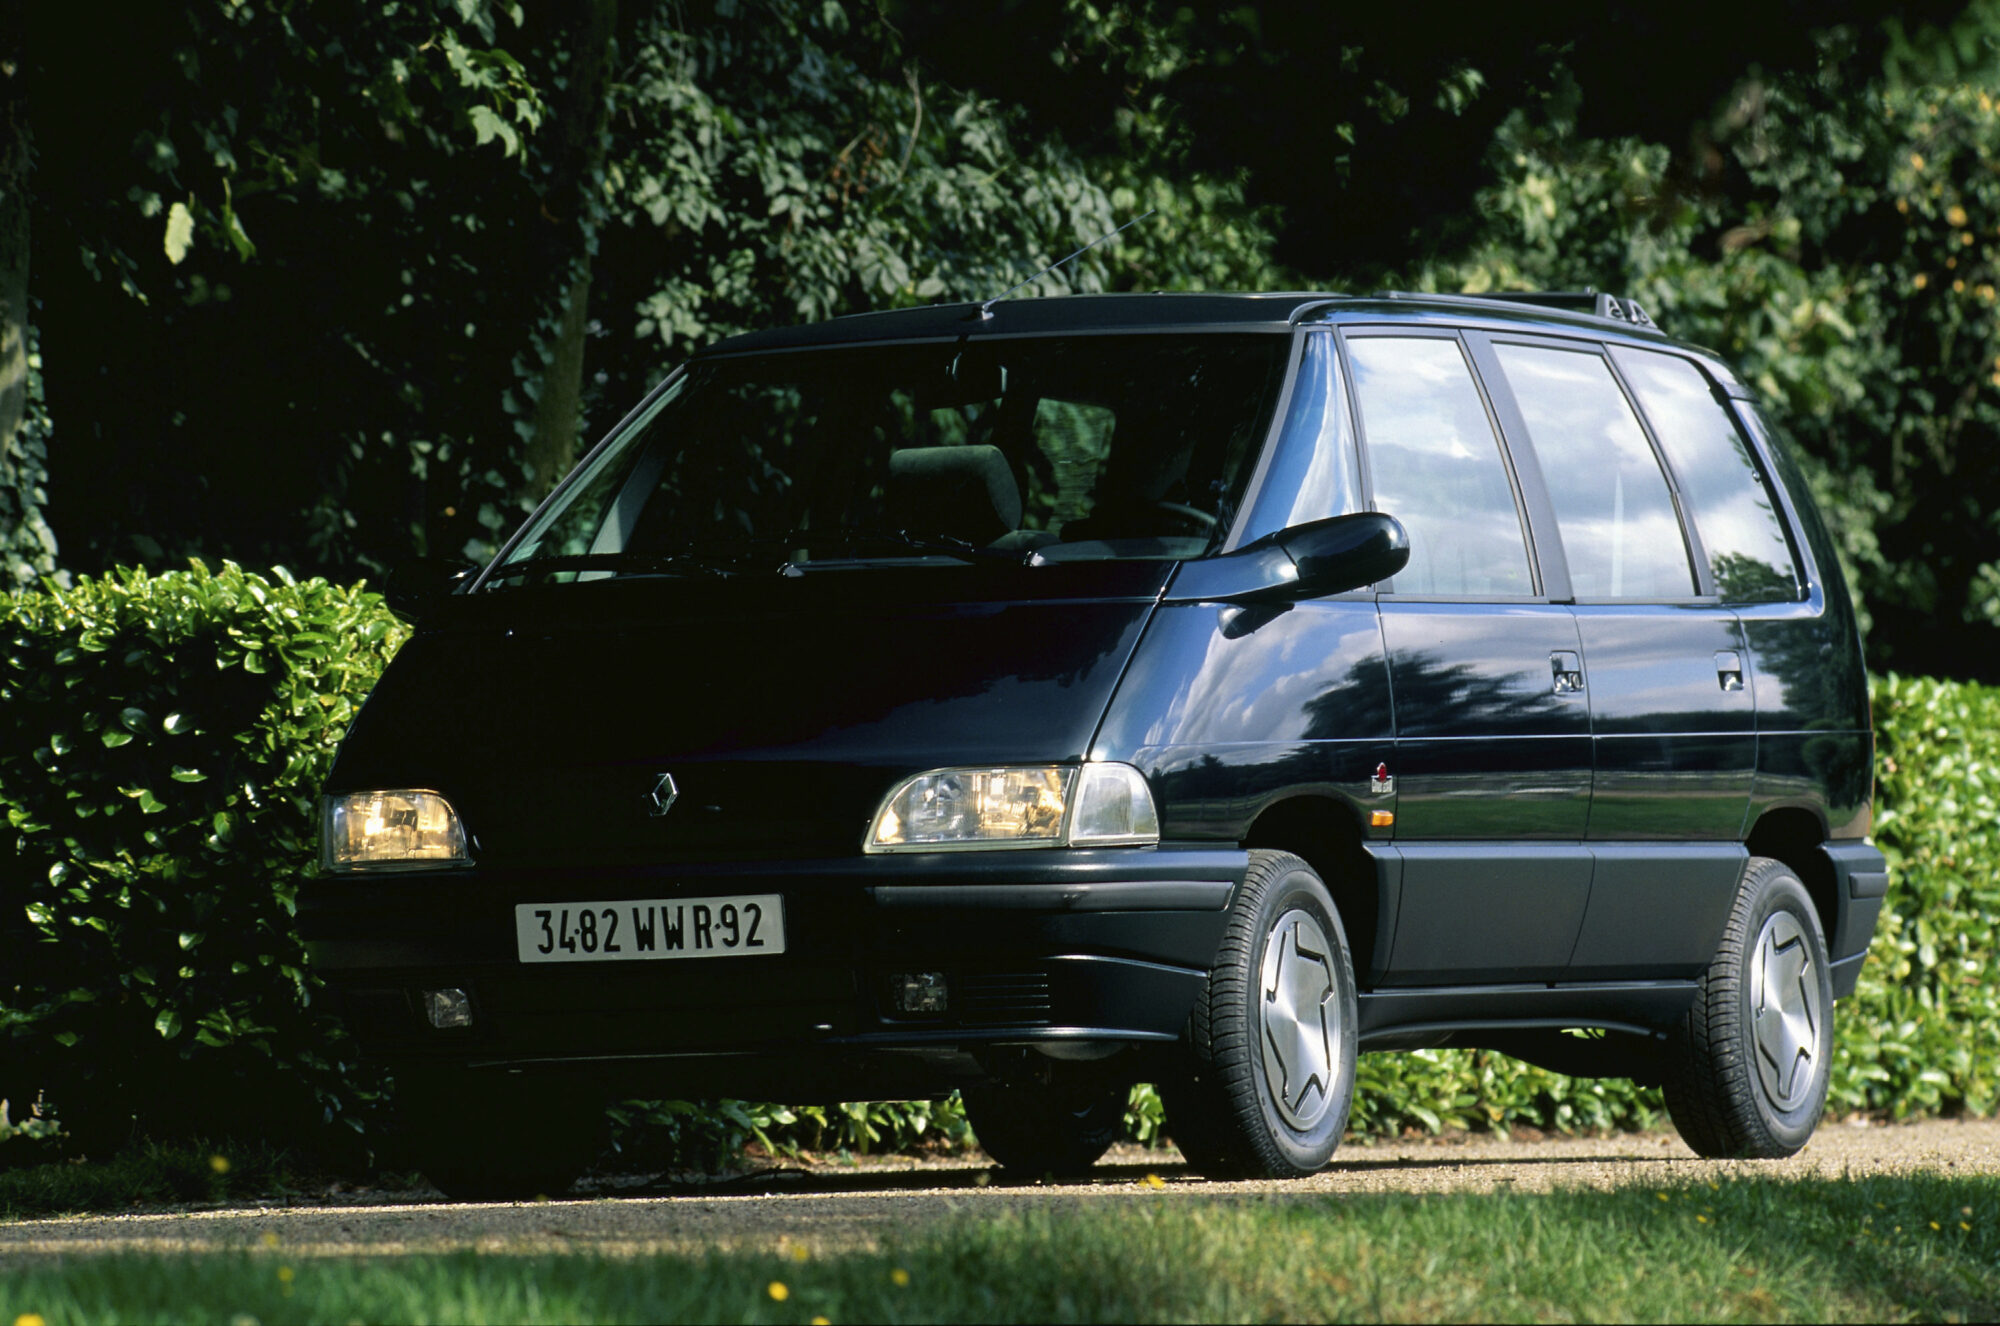 Story - There once was a vehicle named Espace, an iconic name going back 40 years